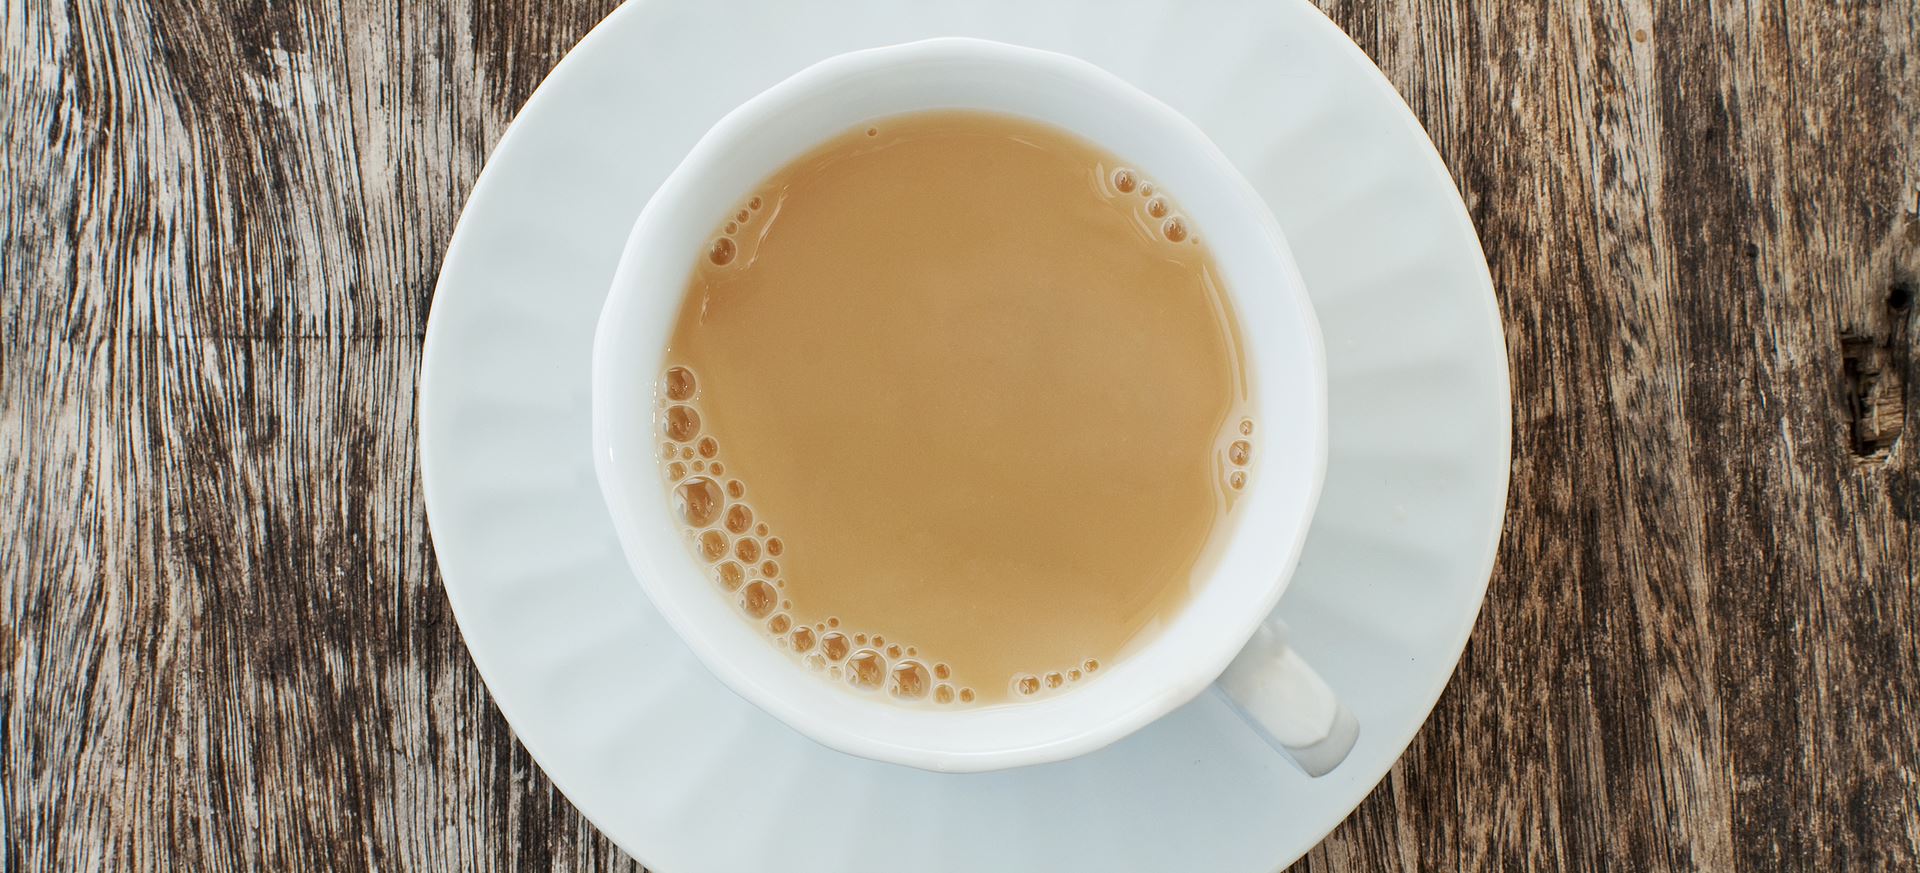 What does 'Spill the tea' mean to you? - Quora